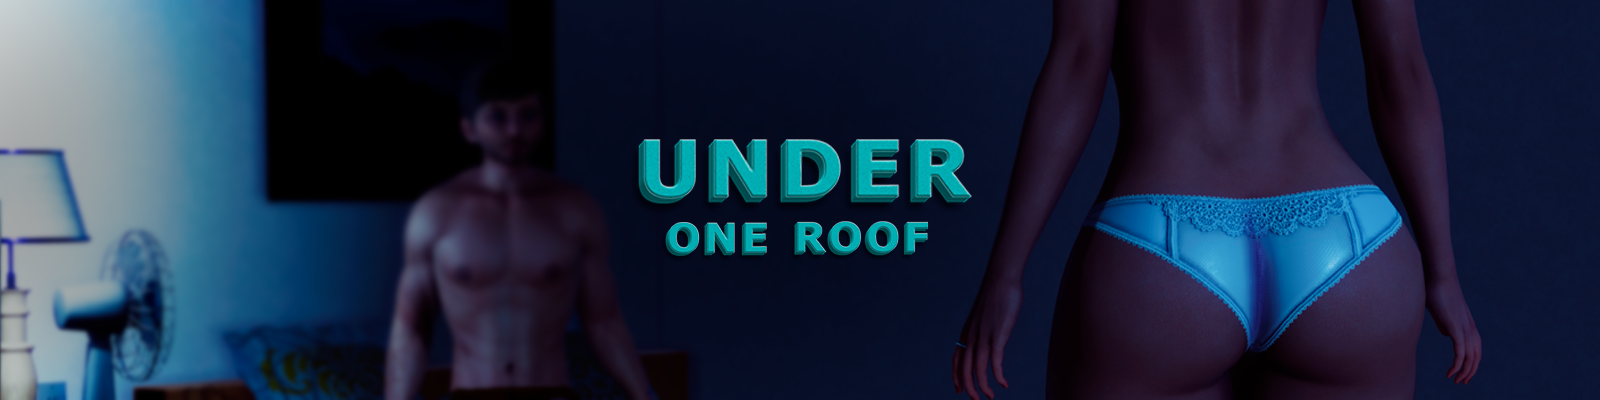 Under One Roof poster